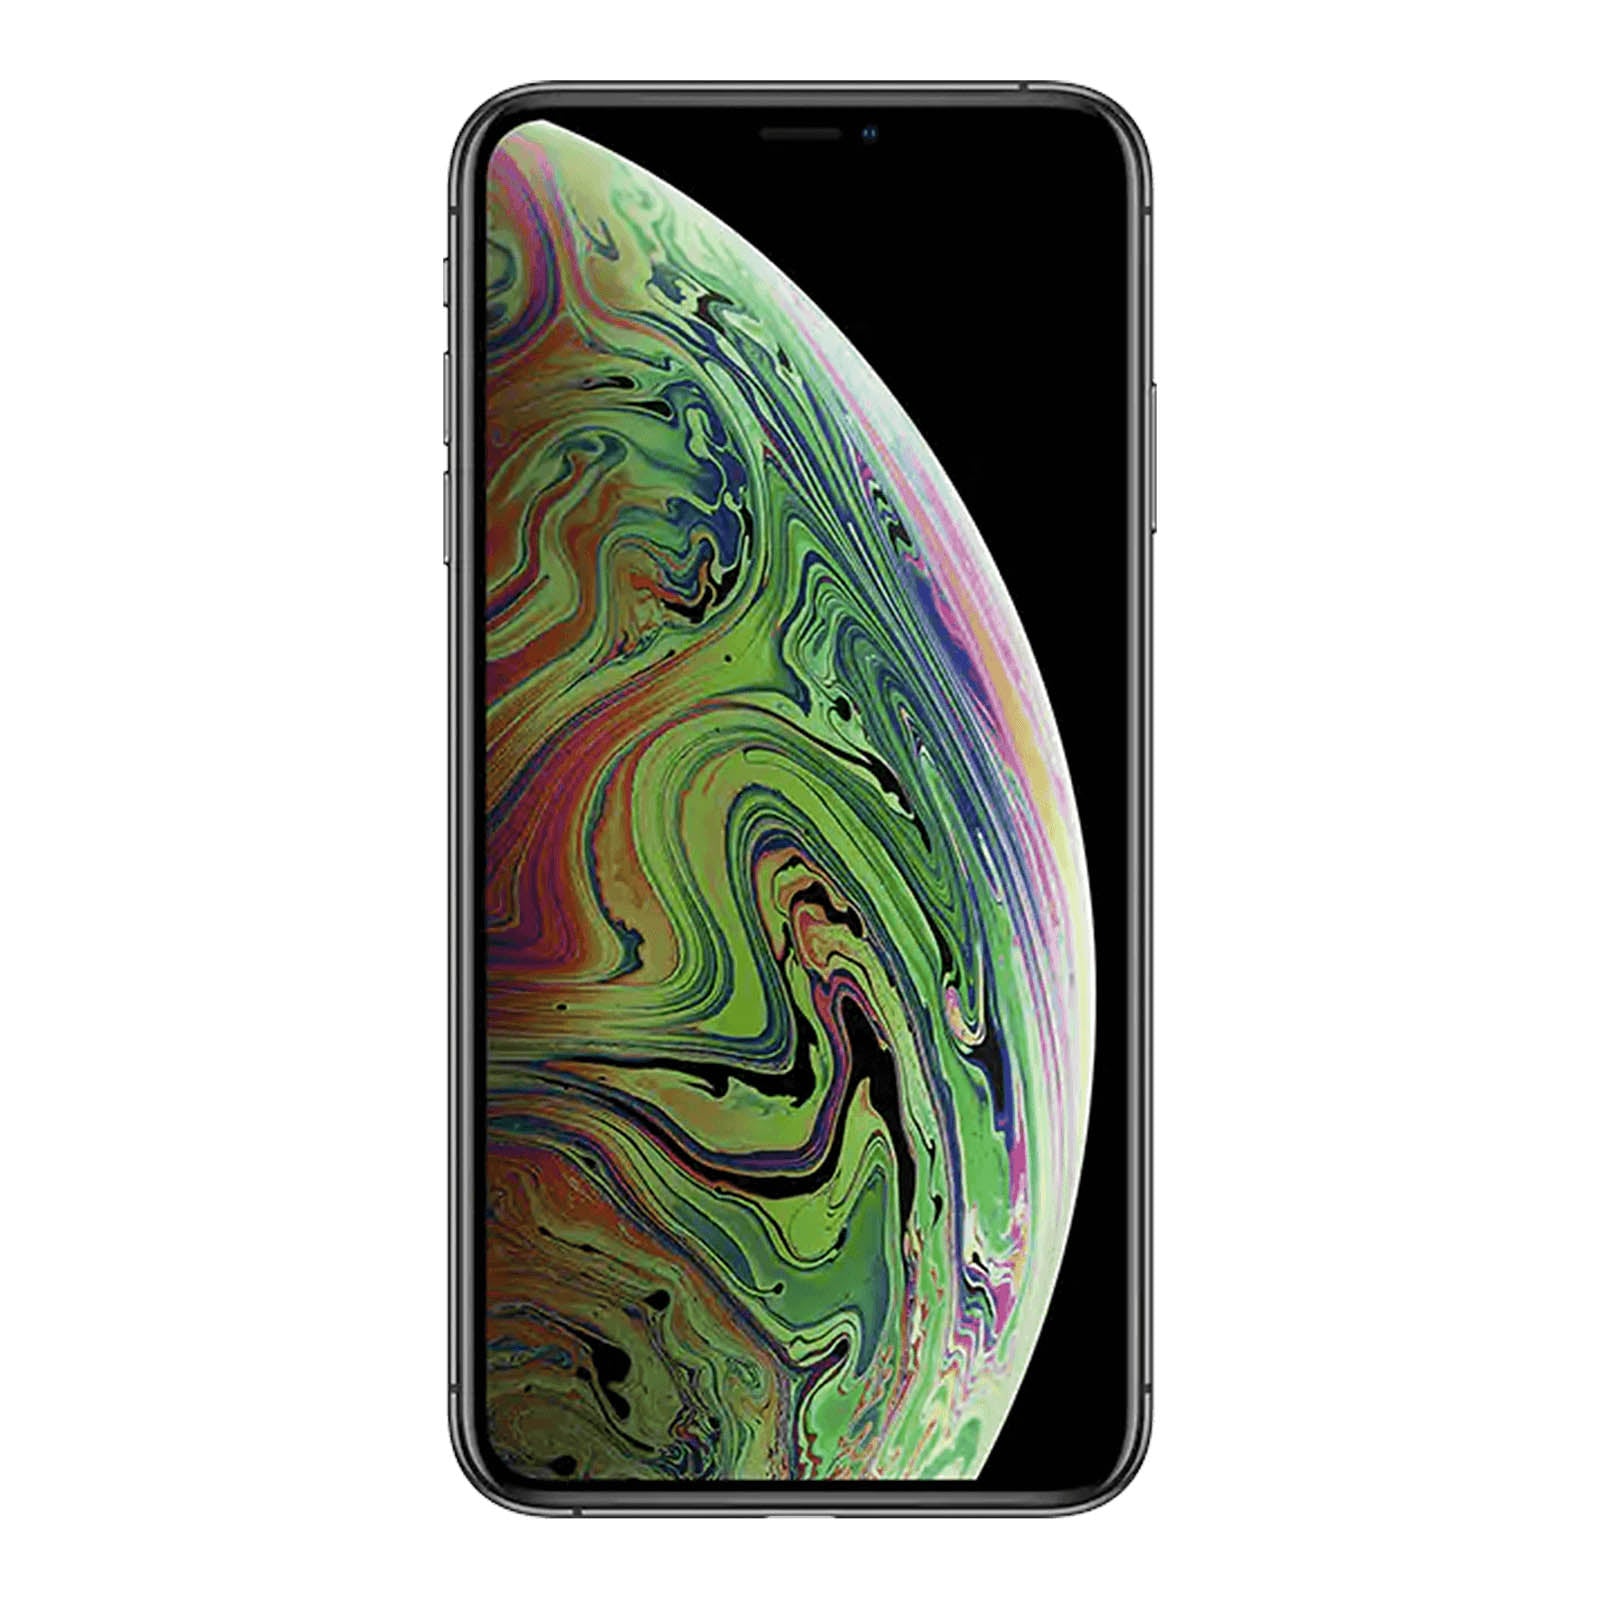 Apple iPhone XS 64GB Space Grey Pristine - AT&T